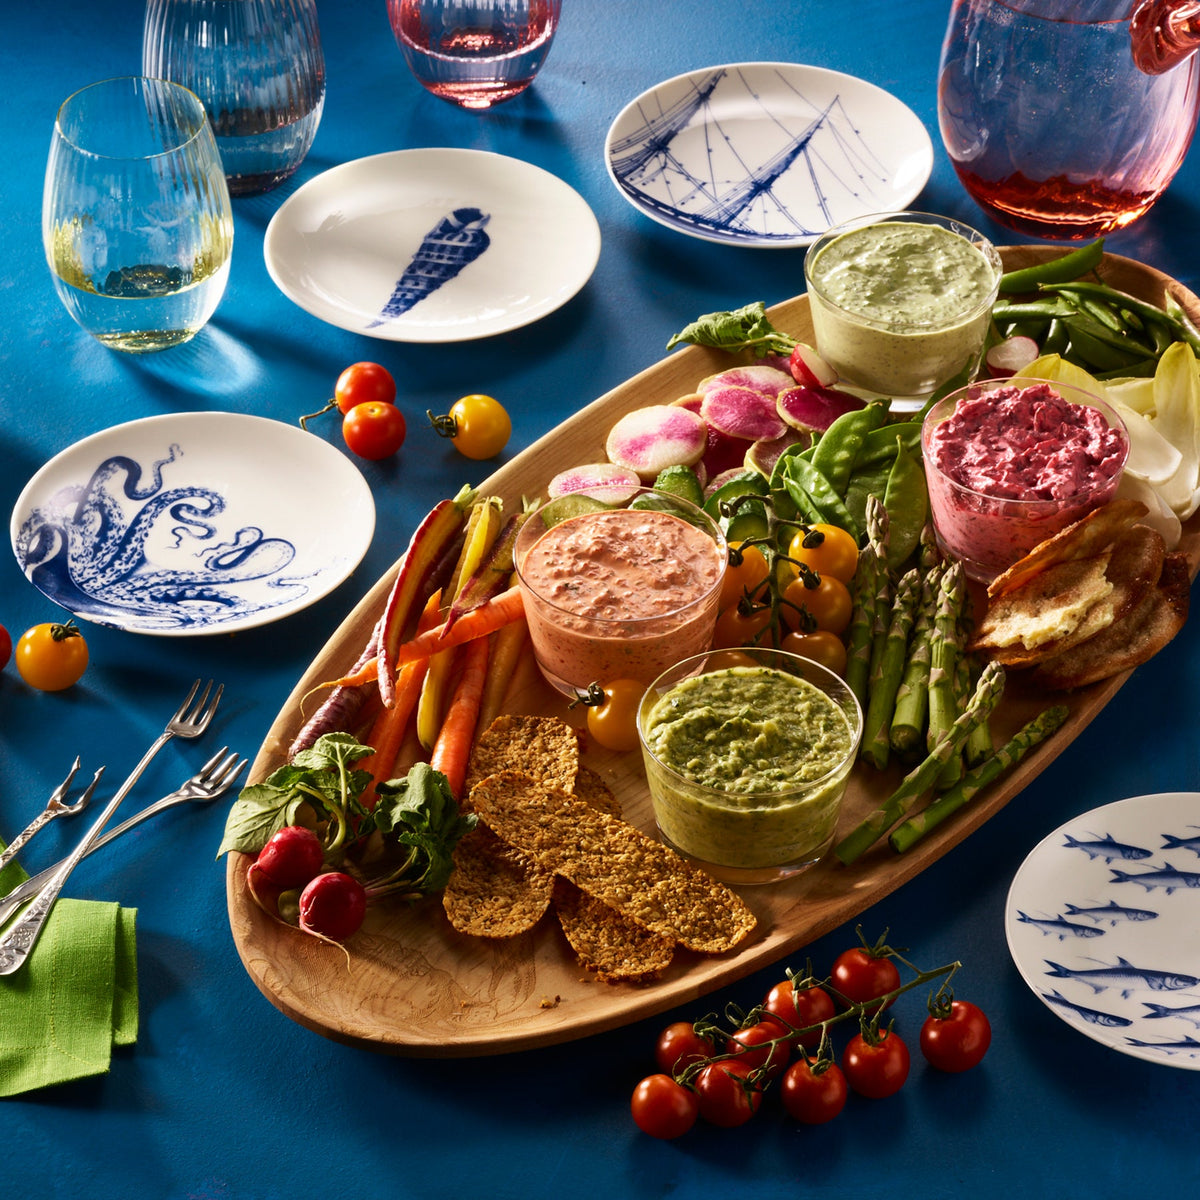 A crudité board is served using tidbit bowls and canapé plates in Lucy, Shell, Rigging and School of Fish patterns by Caskata.